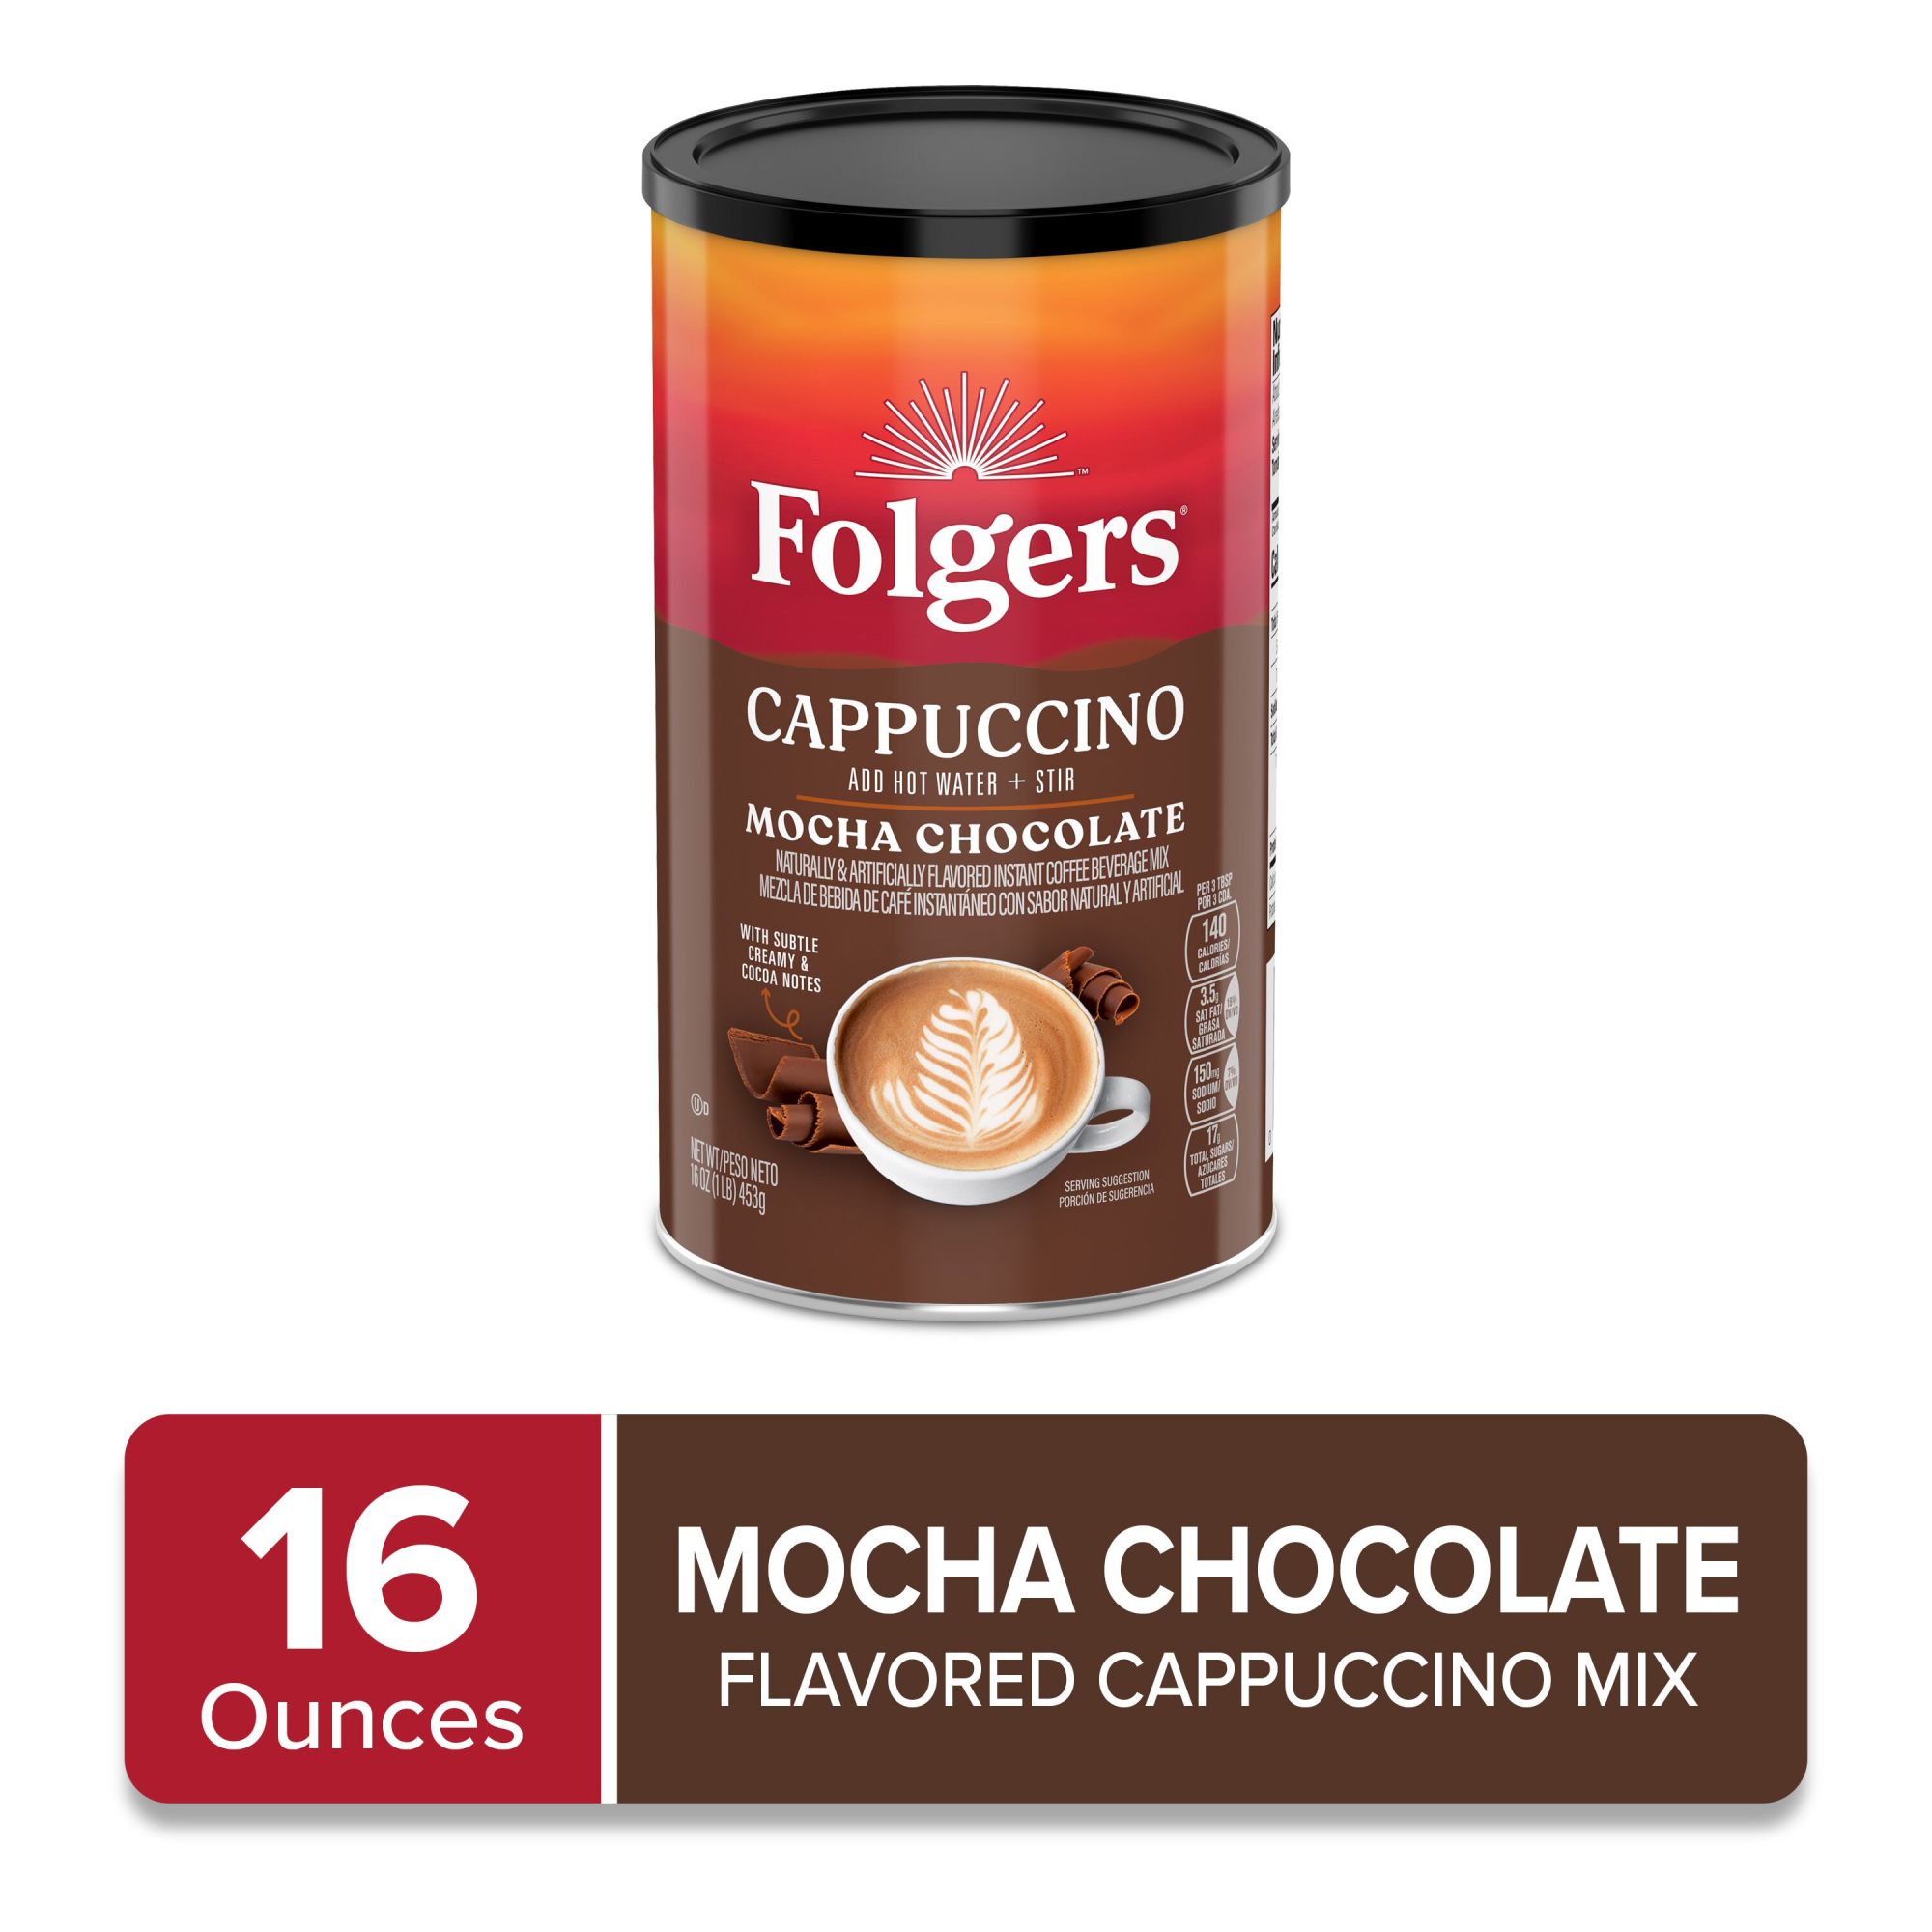 Folgers Mocha Chocolate Flavored Cappuccino Mix, Instant Coffee Beverage, 16-Ounce Canister - image 3 of 9